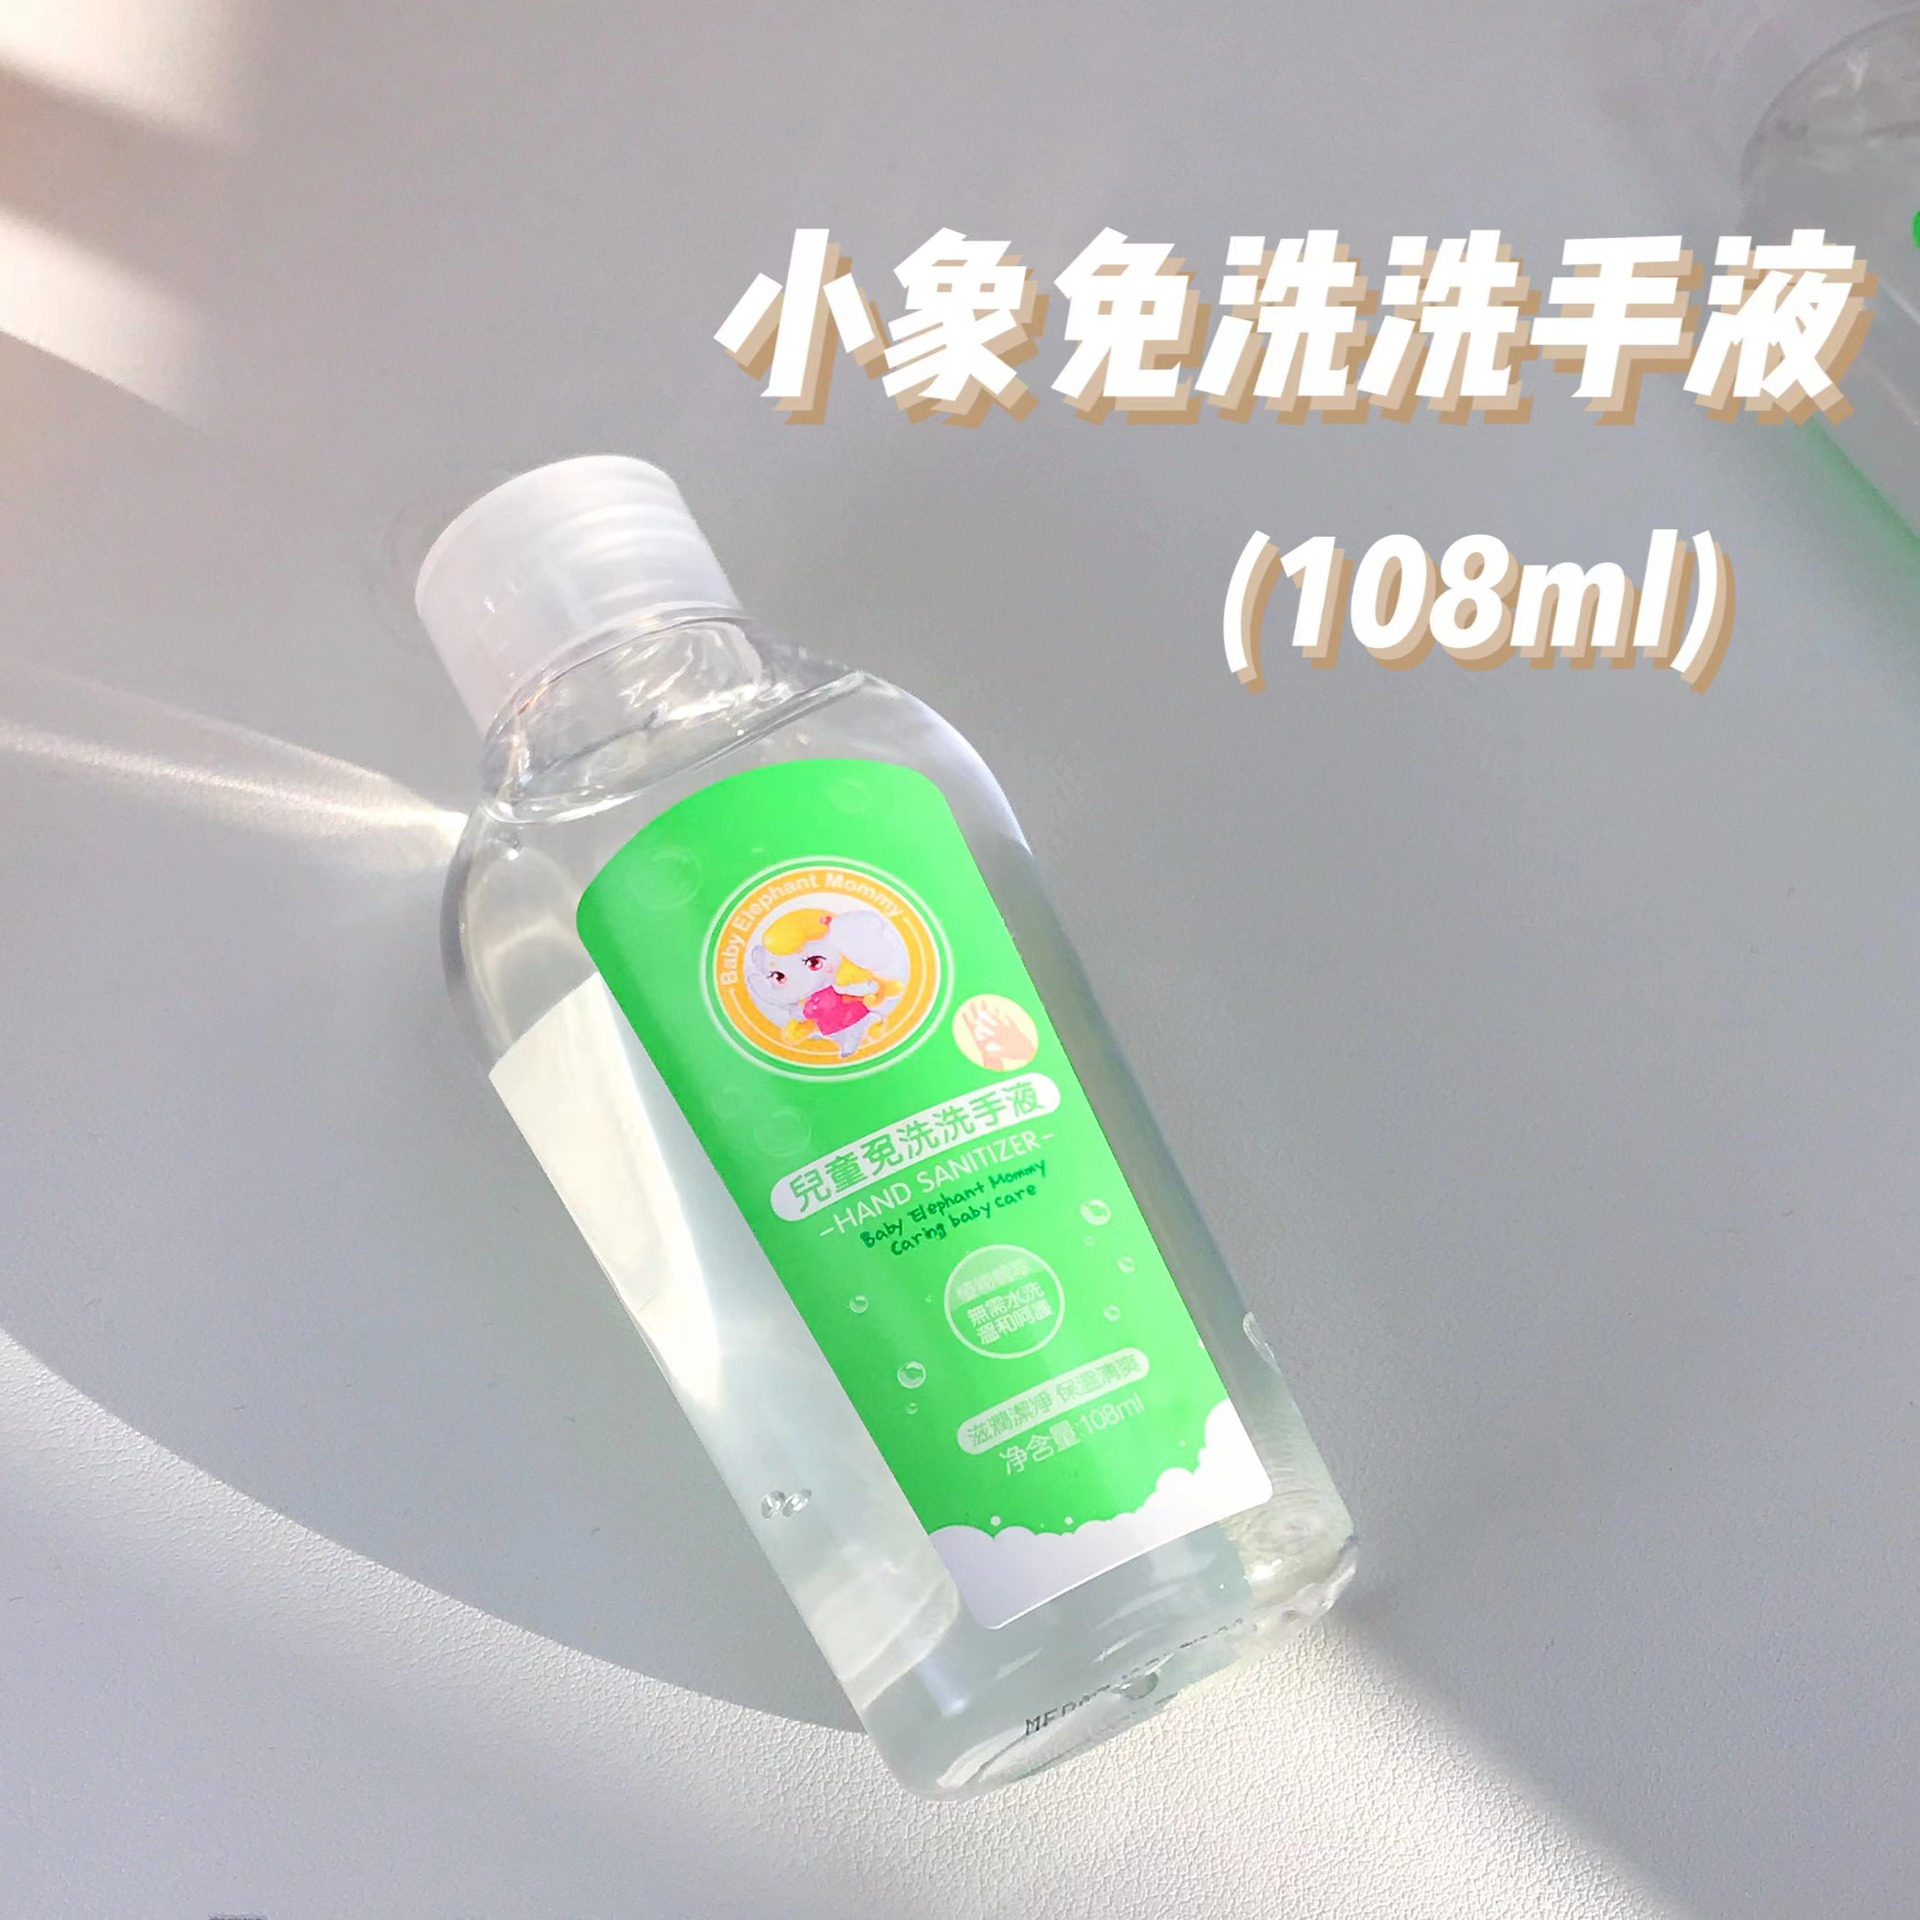 Thailand Small elephant Disposable children Liquid soap washing disinfect Gel sterilization Portable package Take it with you green 108ml